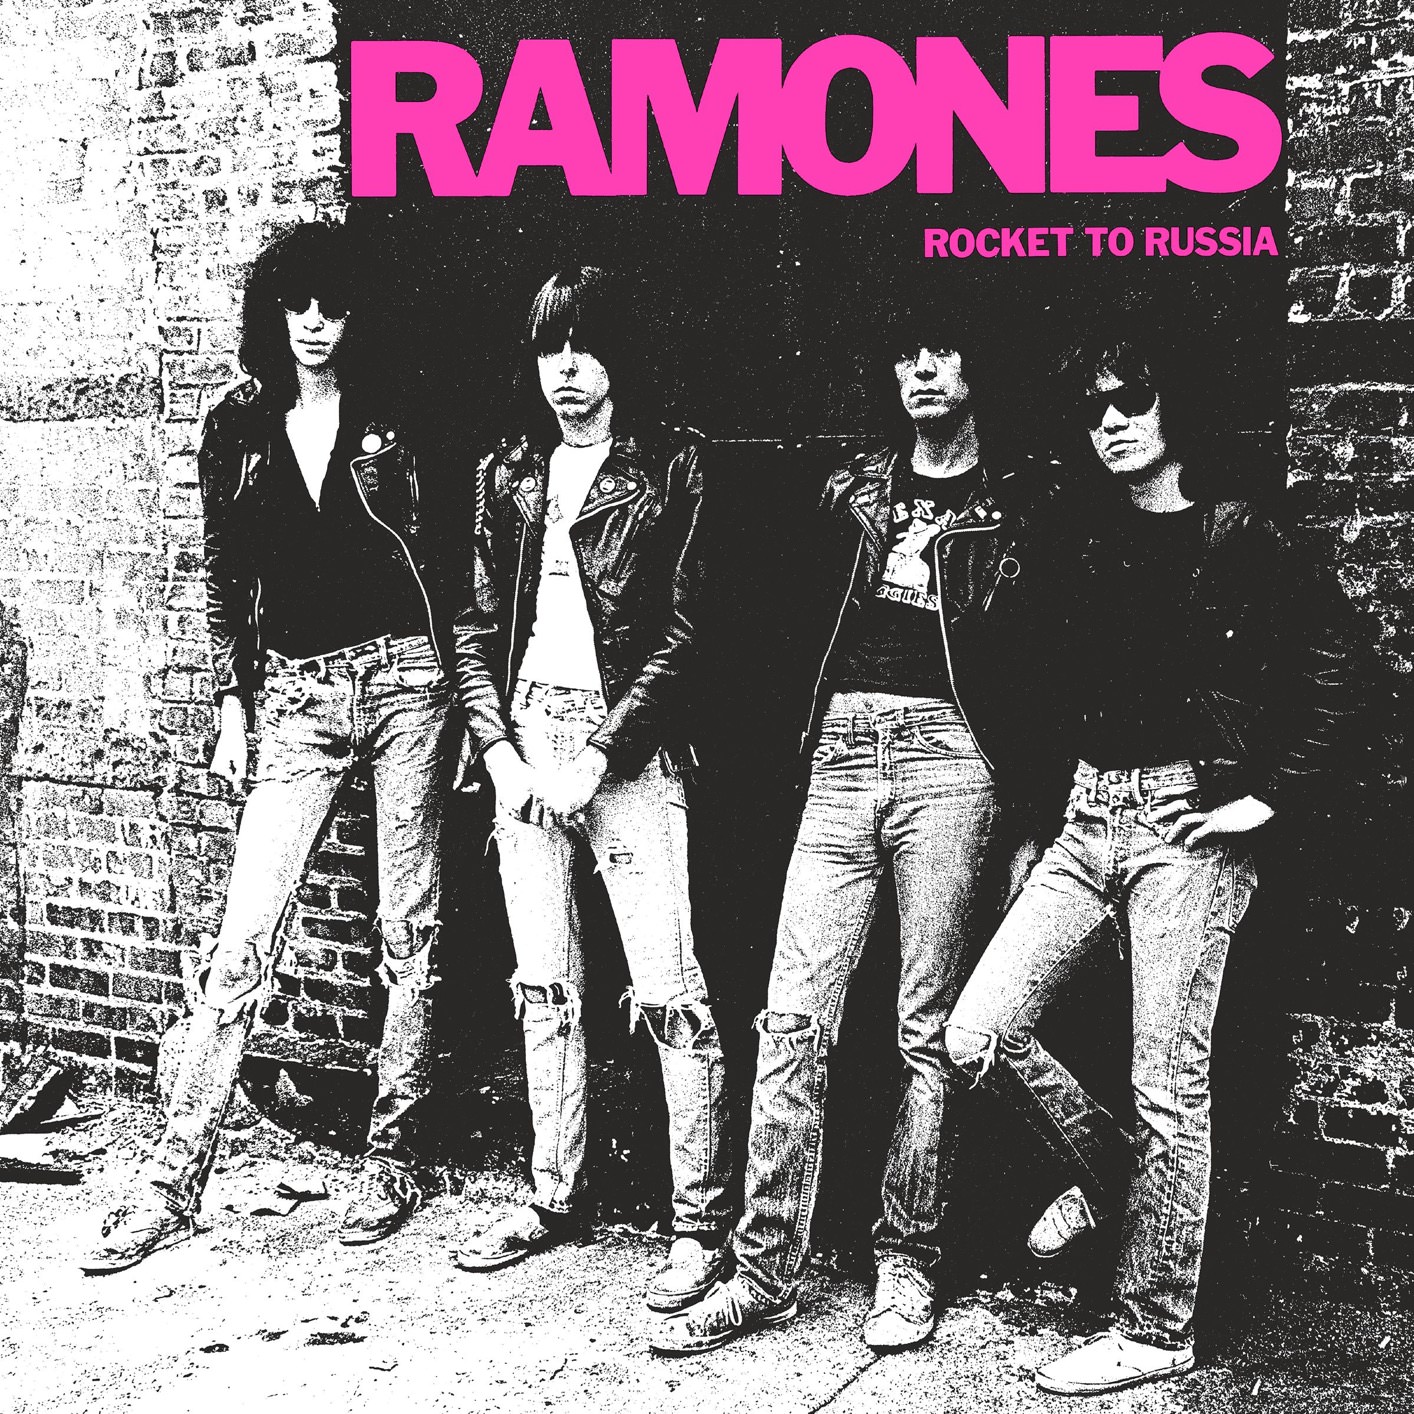 The Ramones - Rocket To Russia (1977) {40th Anniversary Deluxe Edition 2017} [Qobuz FLAC 24bit/96kHz]